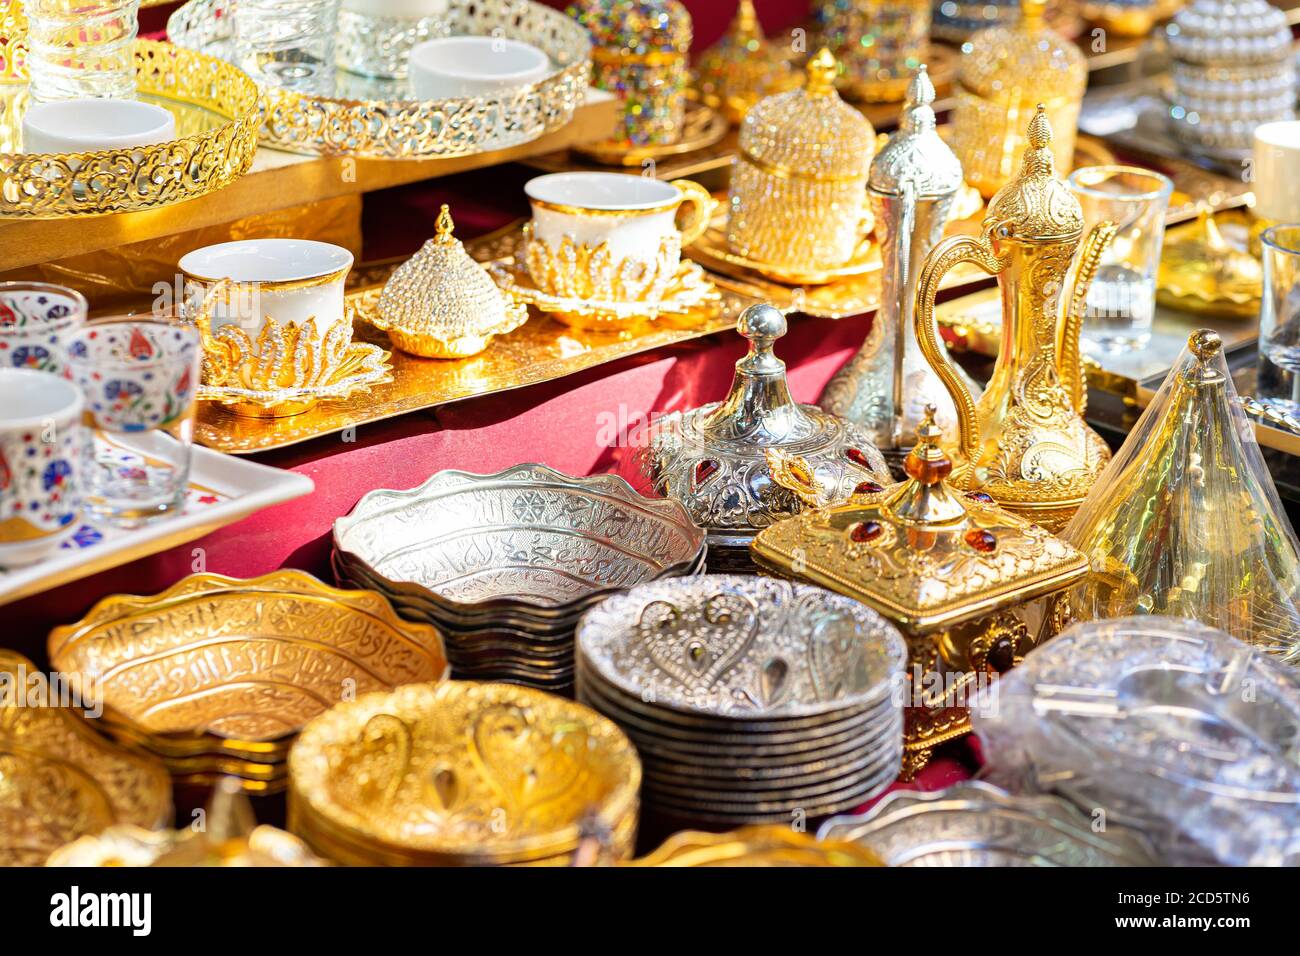 Metal bowls, dishes in market traditional Asian turkish bowls kitchenwear in silver and golden metal Stock Photo